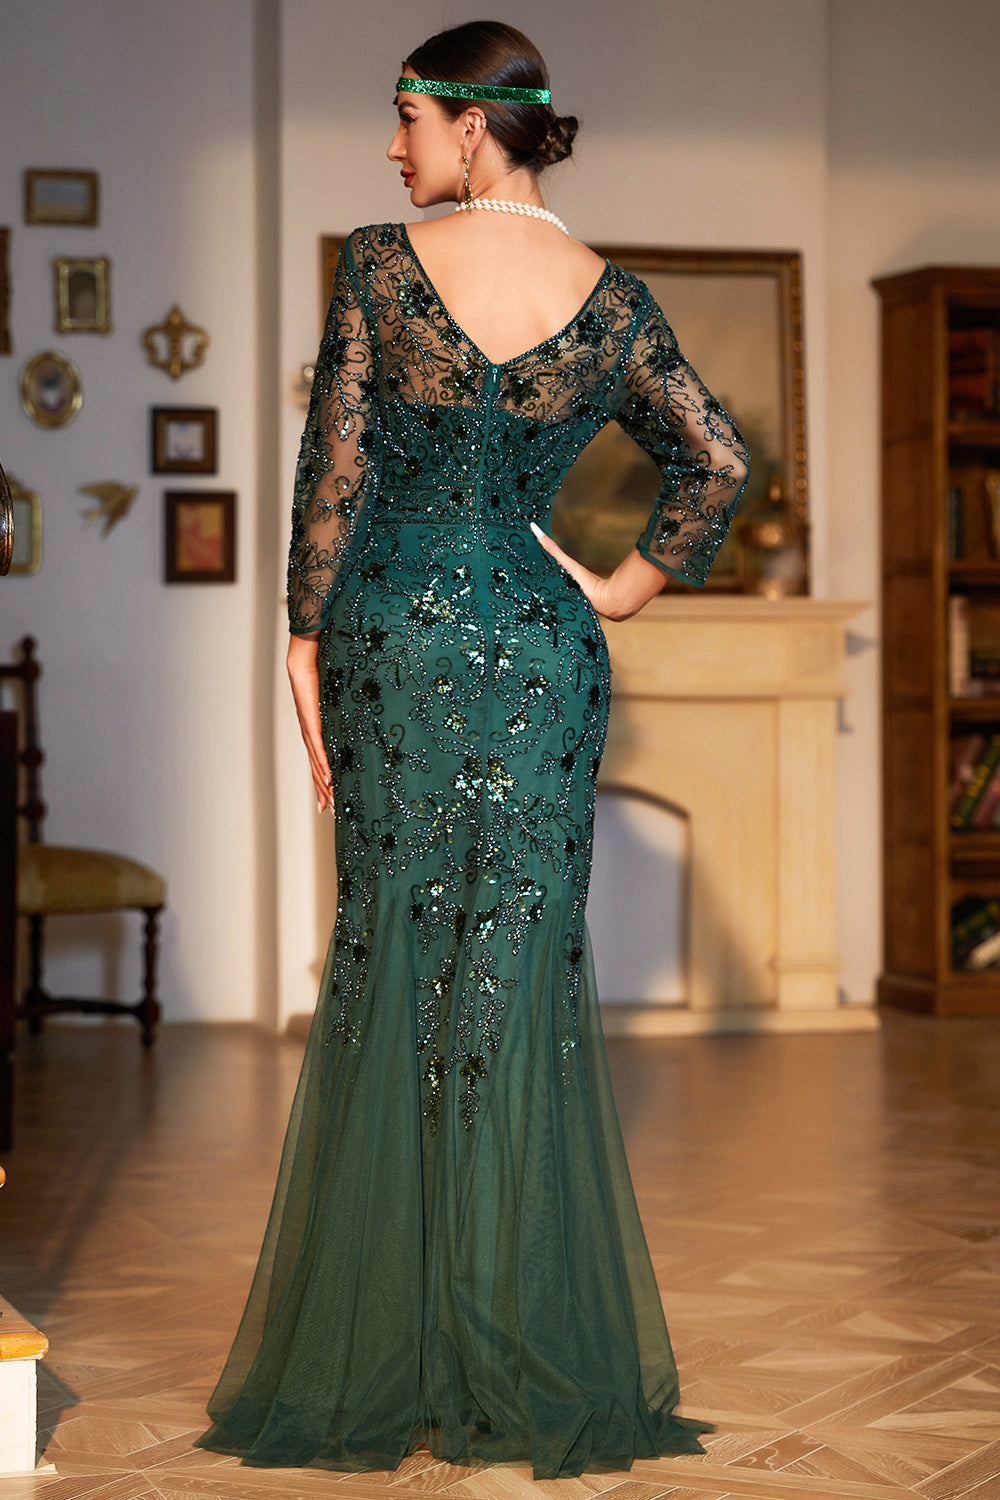 Sparkly Dark Green Sequined Long 1920s Flapper Dress with 20s Accessories